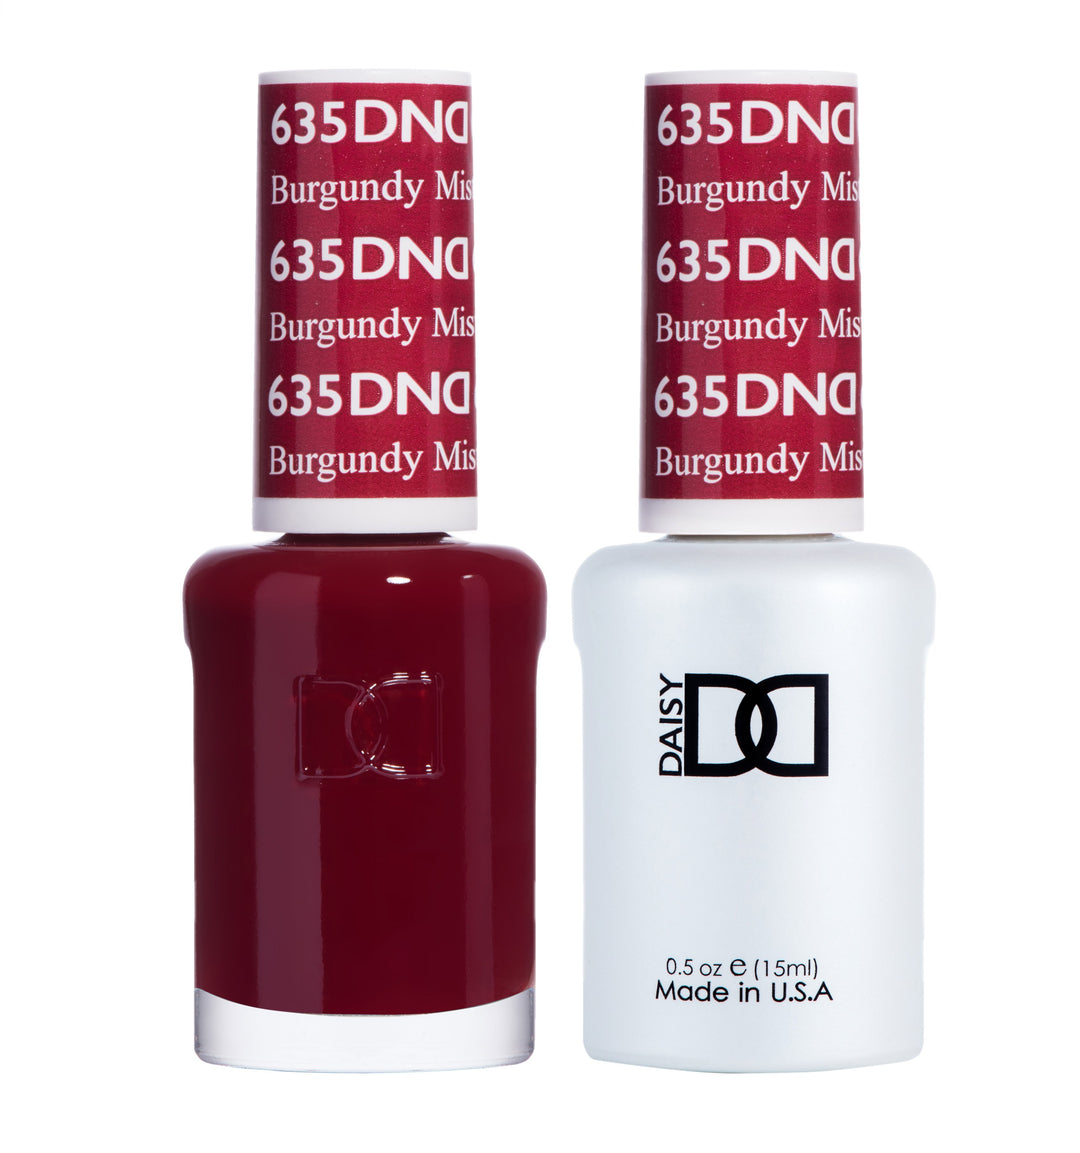 DND DUO Nail Lacquer and UV|LED Gel Polish Burgandy Mist 635 (2 x 15ml)